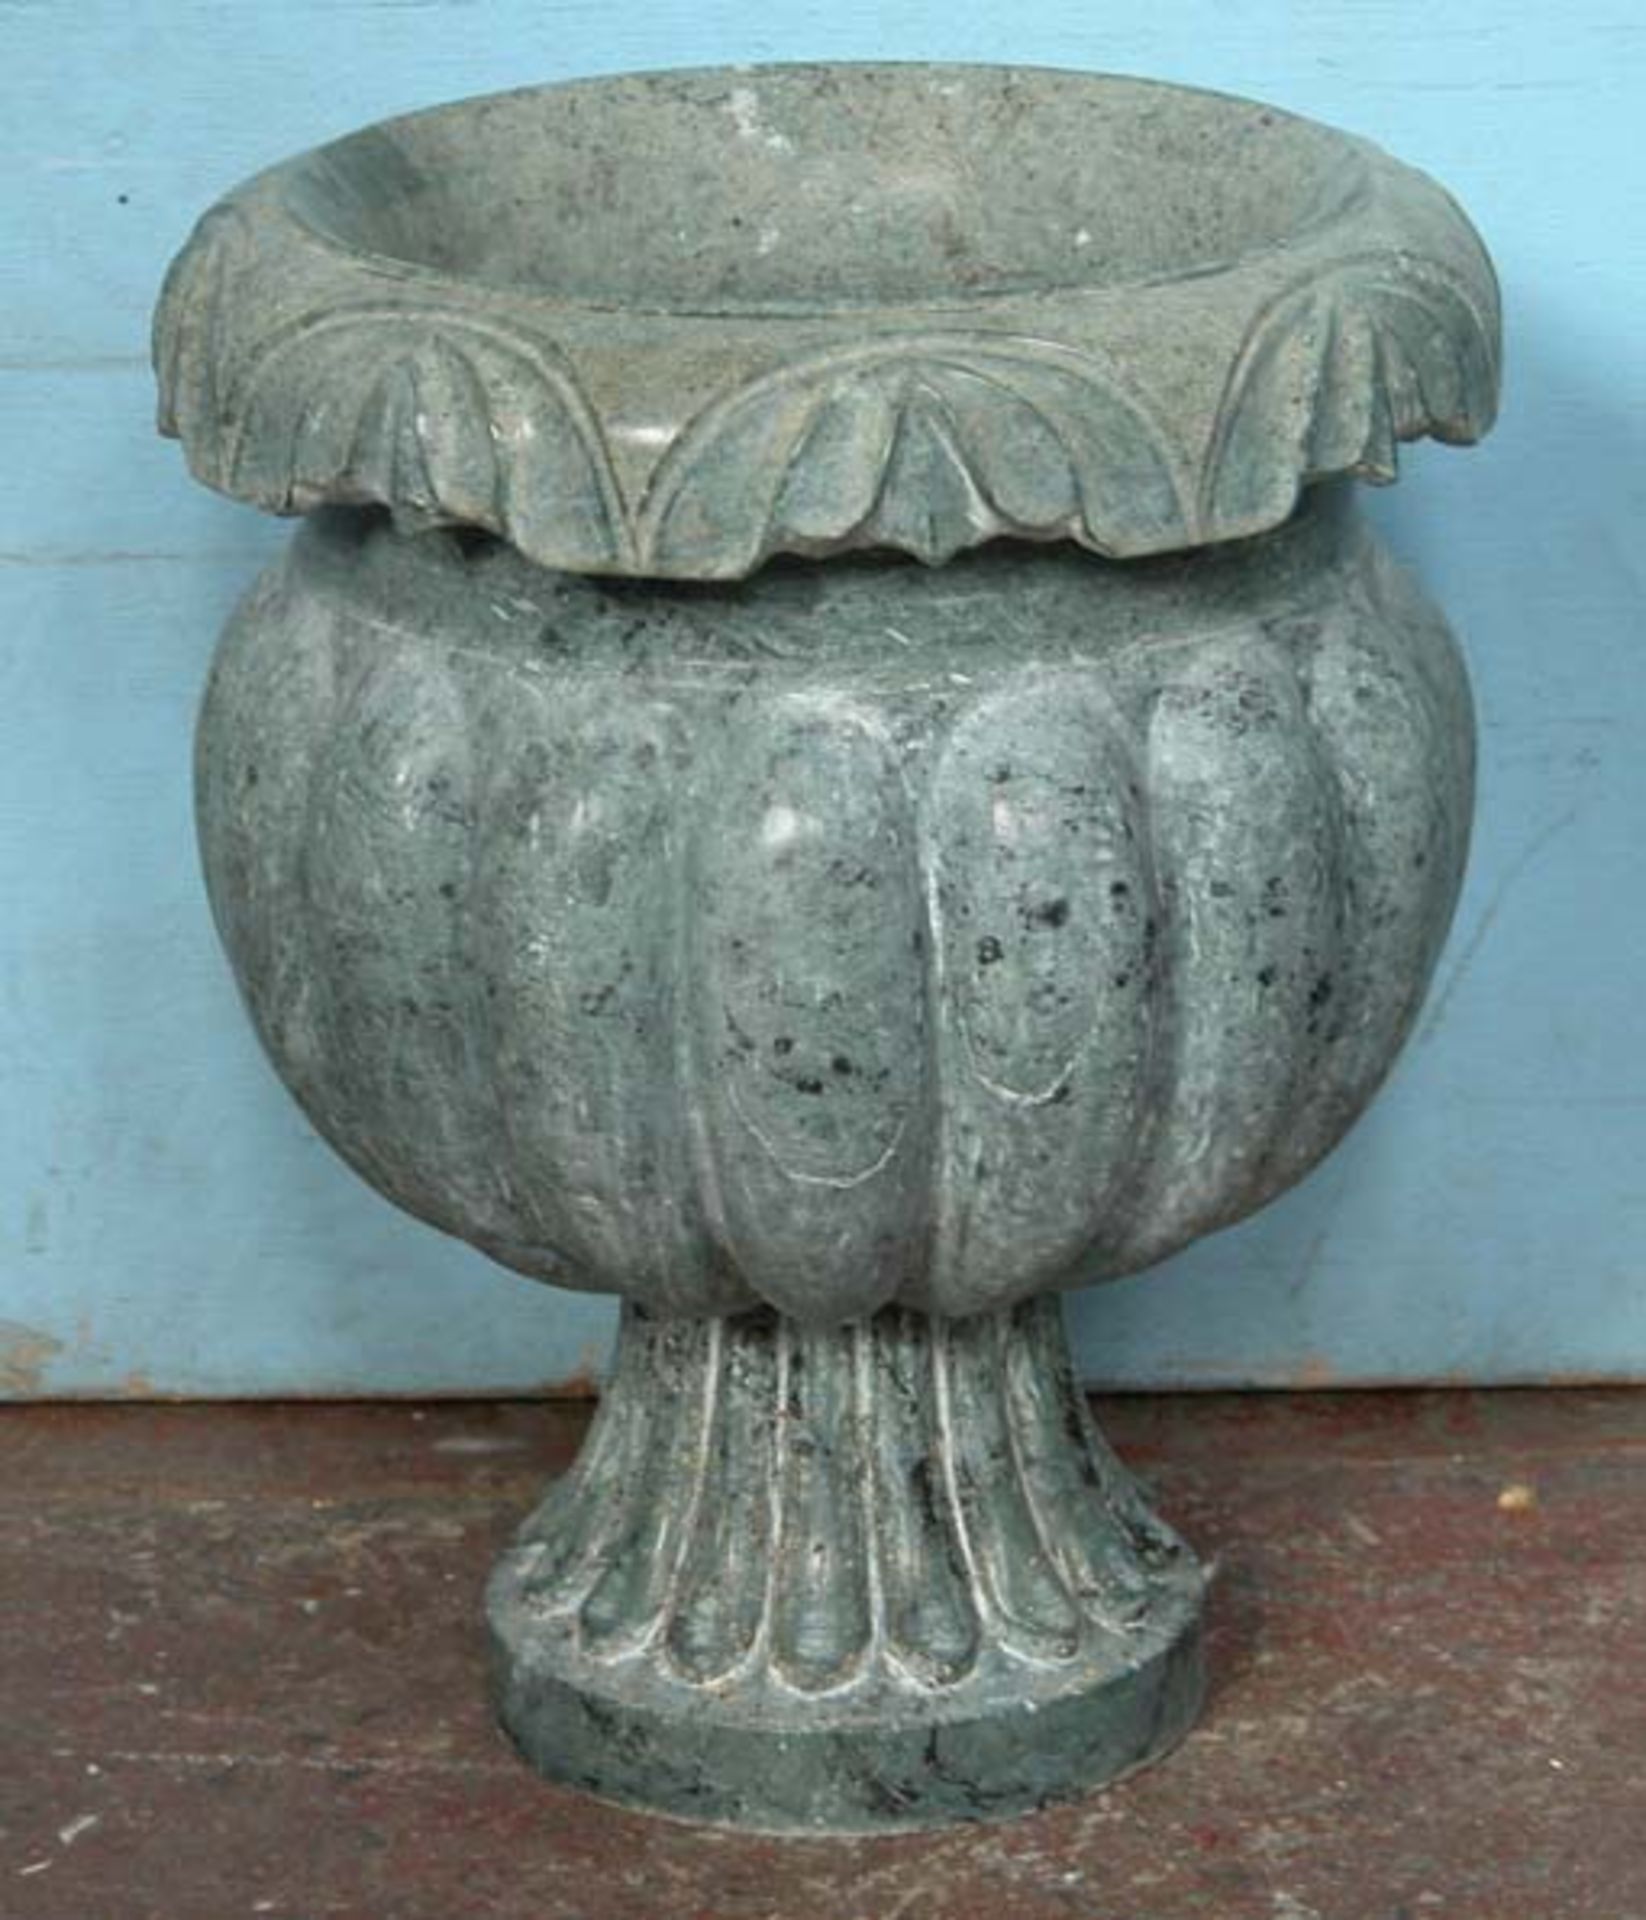 *PAIR OF MARBLE URNS, EARLY 1900S. 390MM (15.25IN) HIGH X 305MM (12IN) DIAMETER [0] - Image 3 of 4